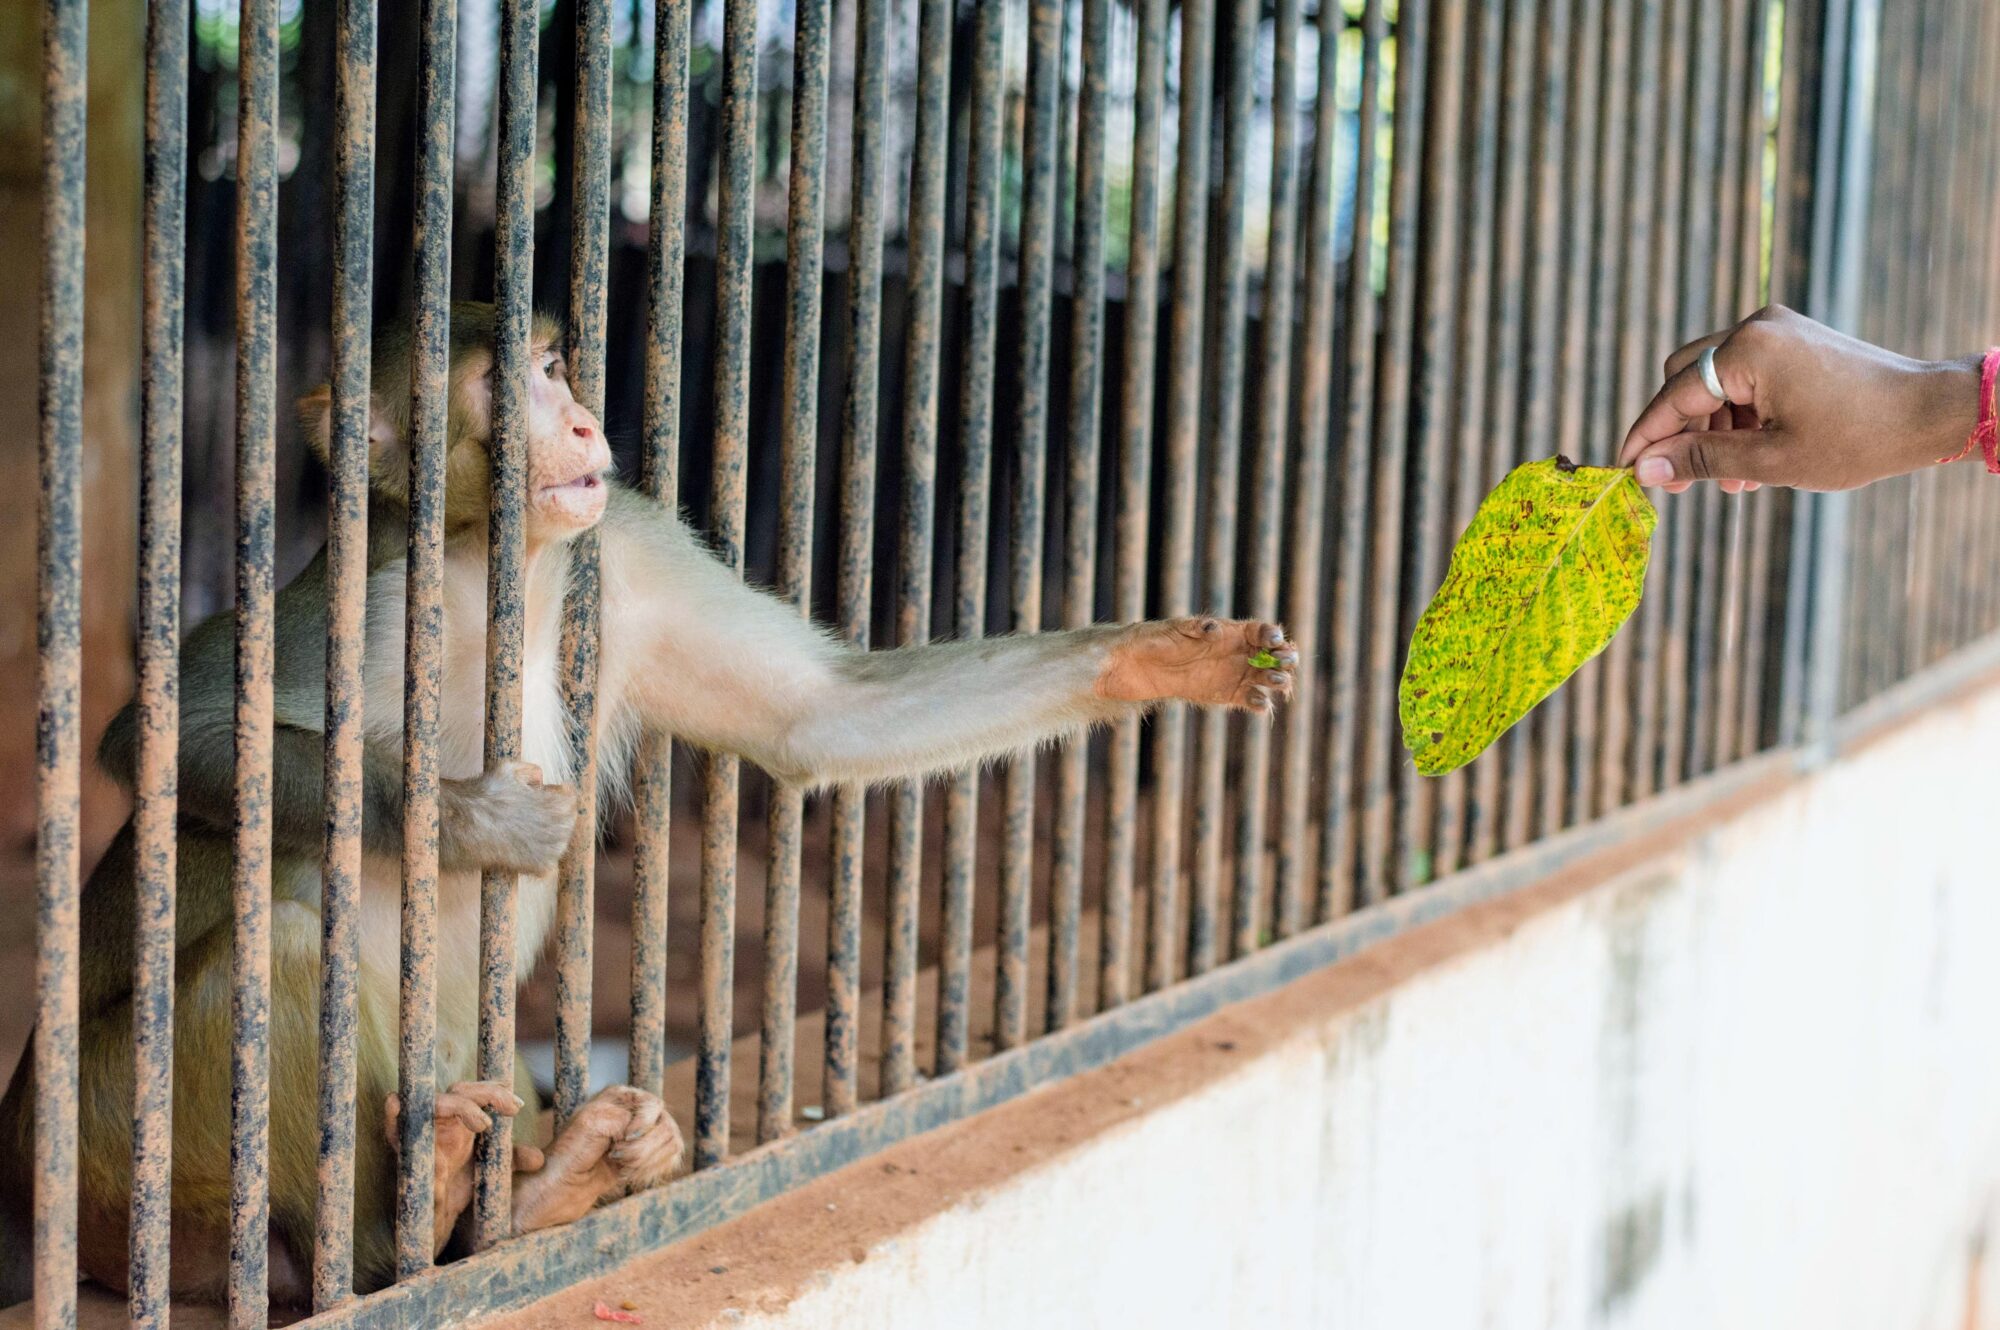 How can Partitions & Dividers be used in Zoos?